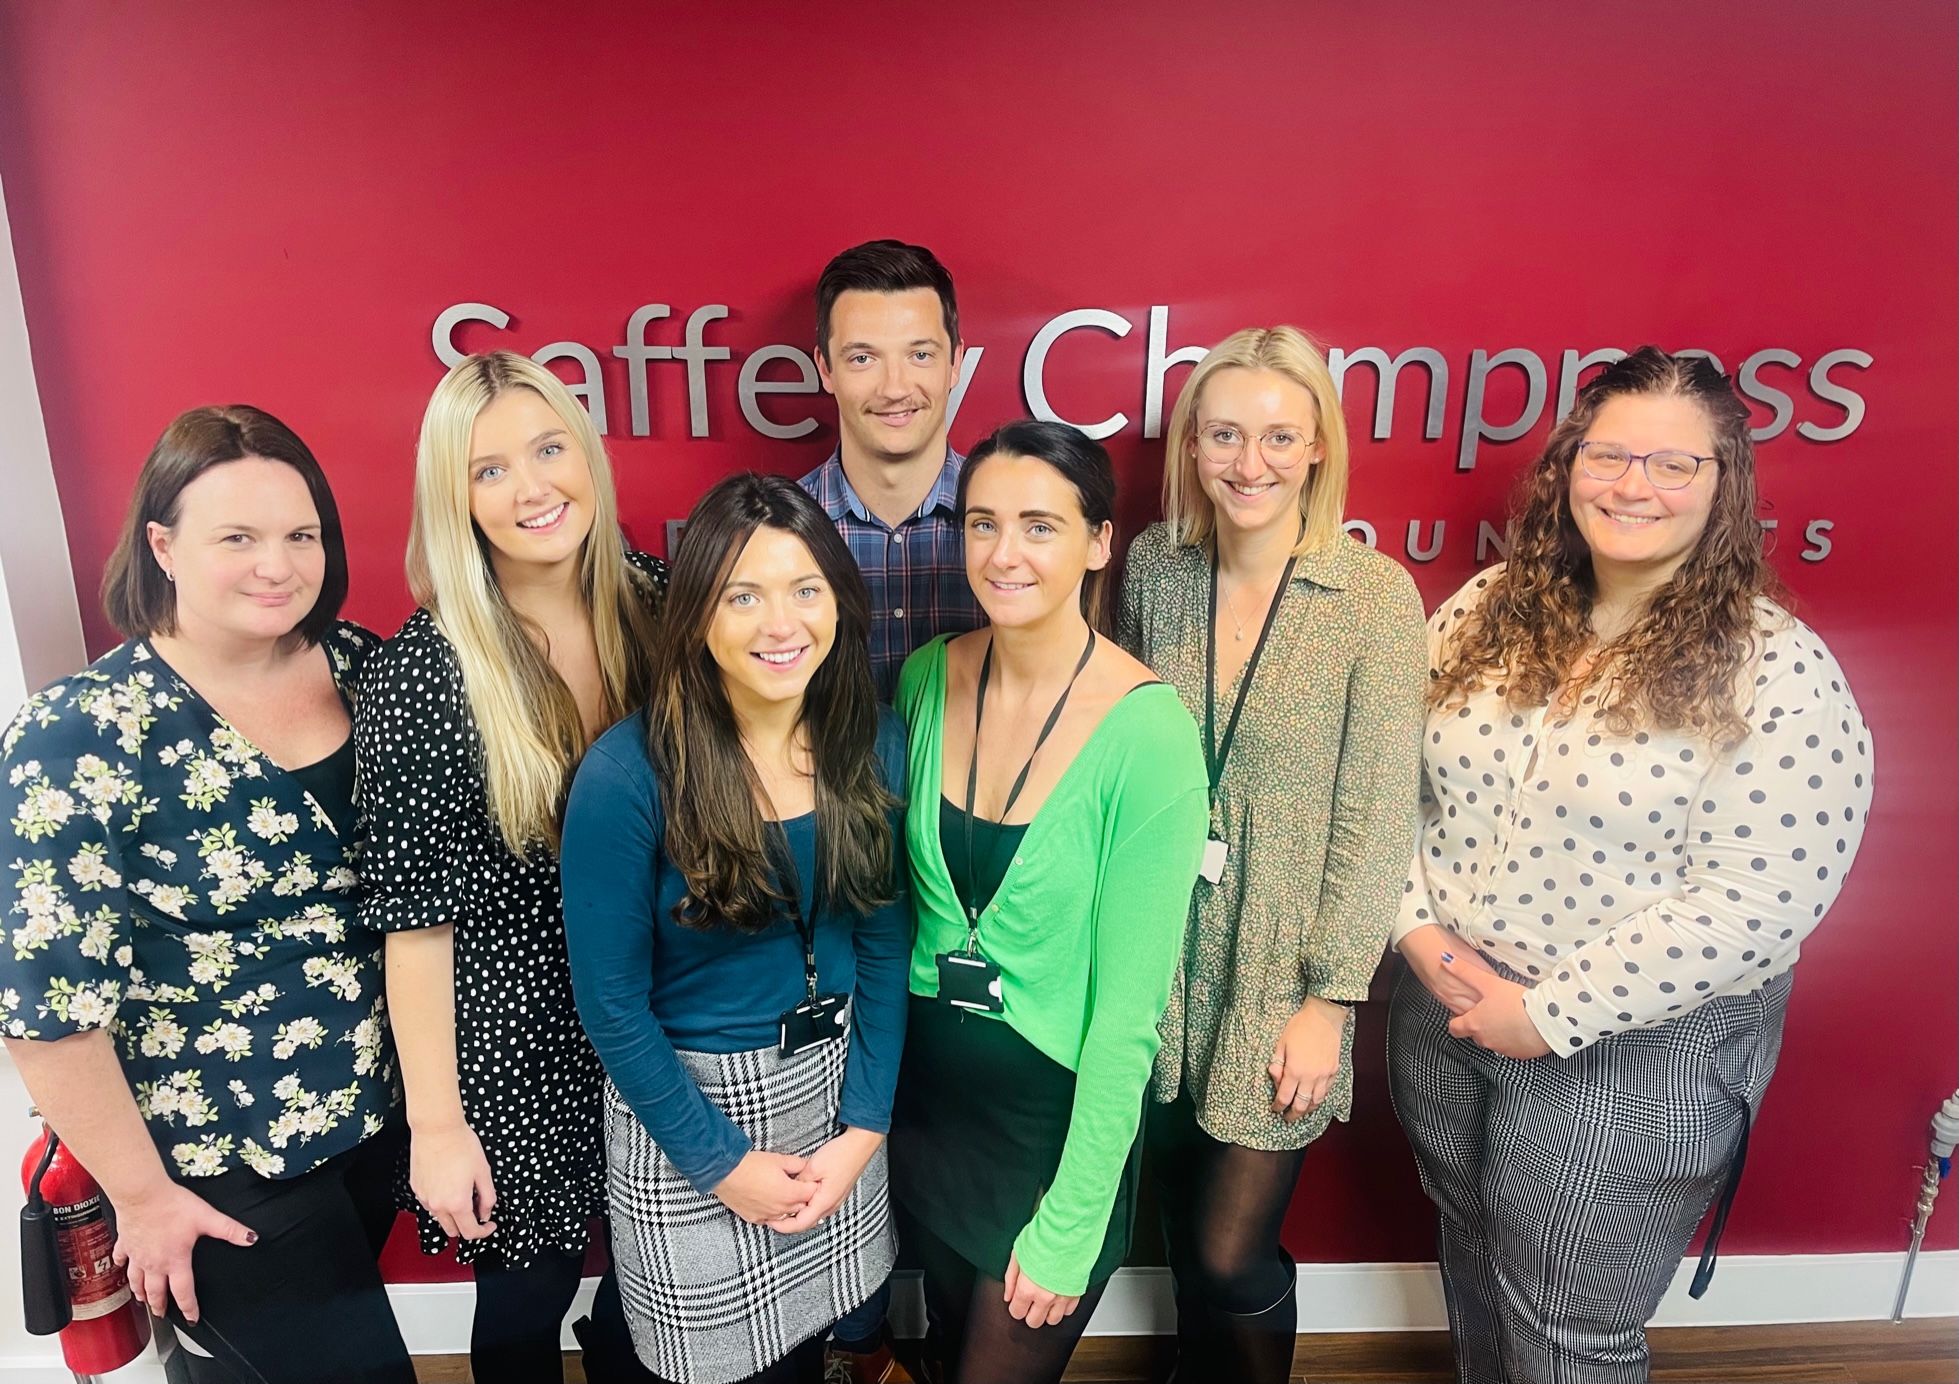 Saffery Champness team celebrate promotions in Bournemouth Office